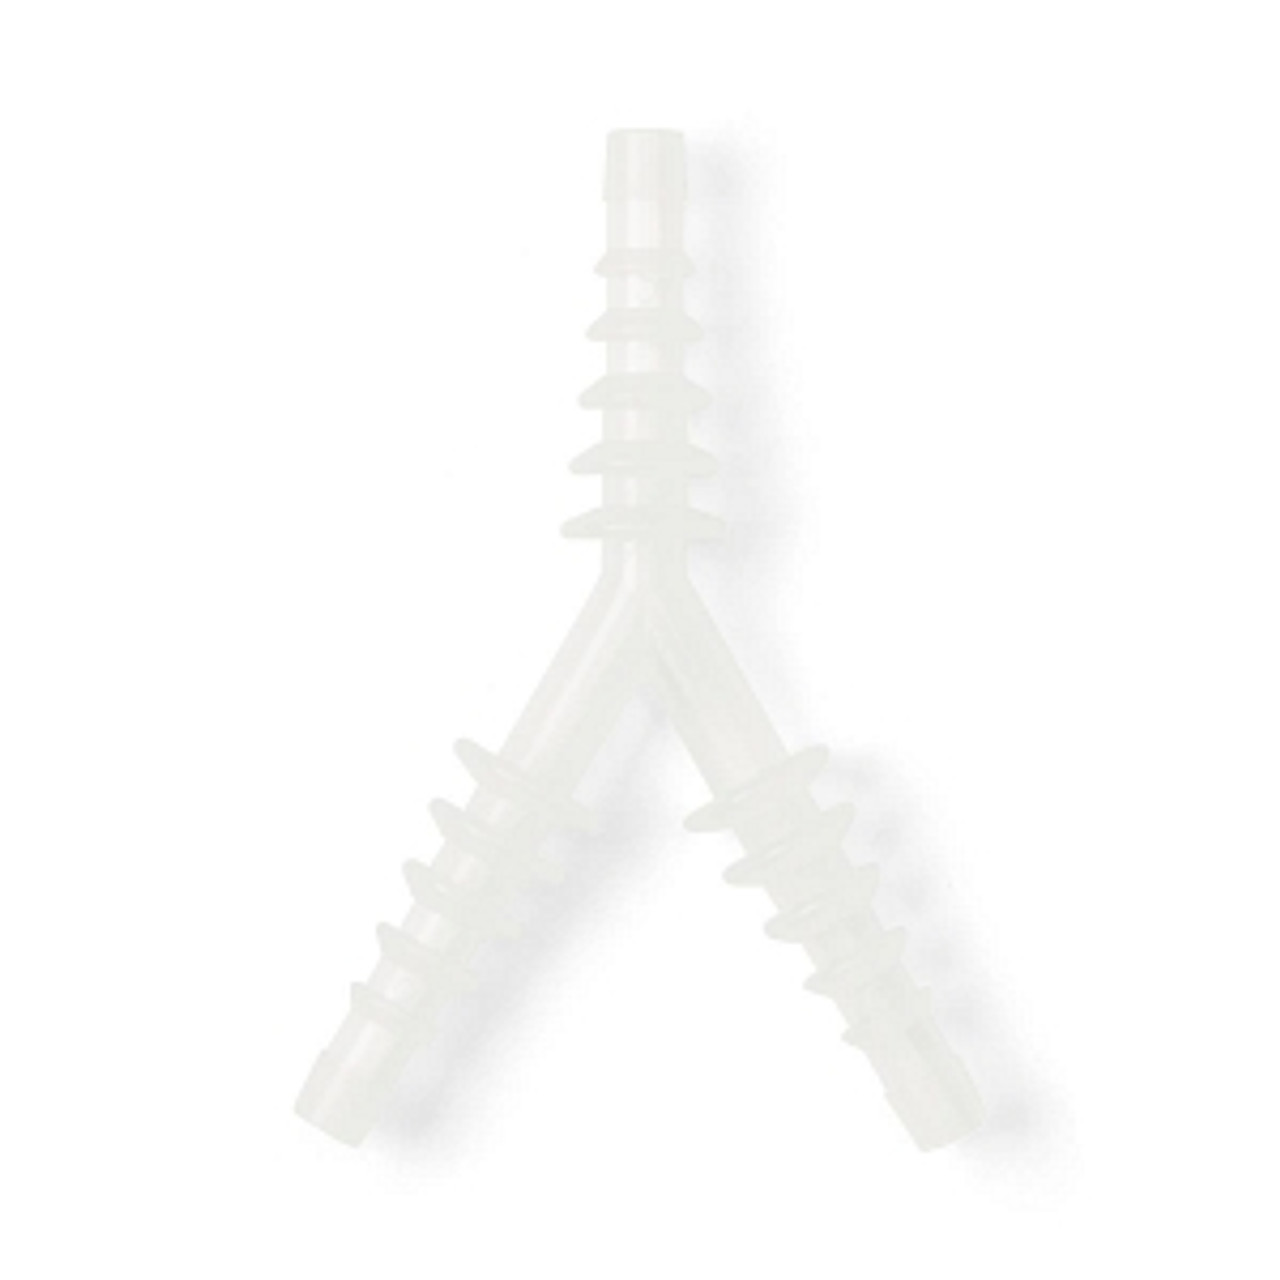 Lightweight plastic connectors allow for multiple pieces of tubing to be joined together
Sterile and nonsterile options available